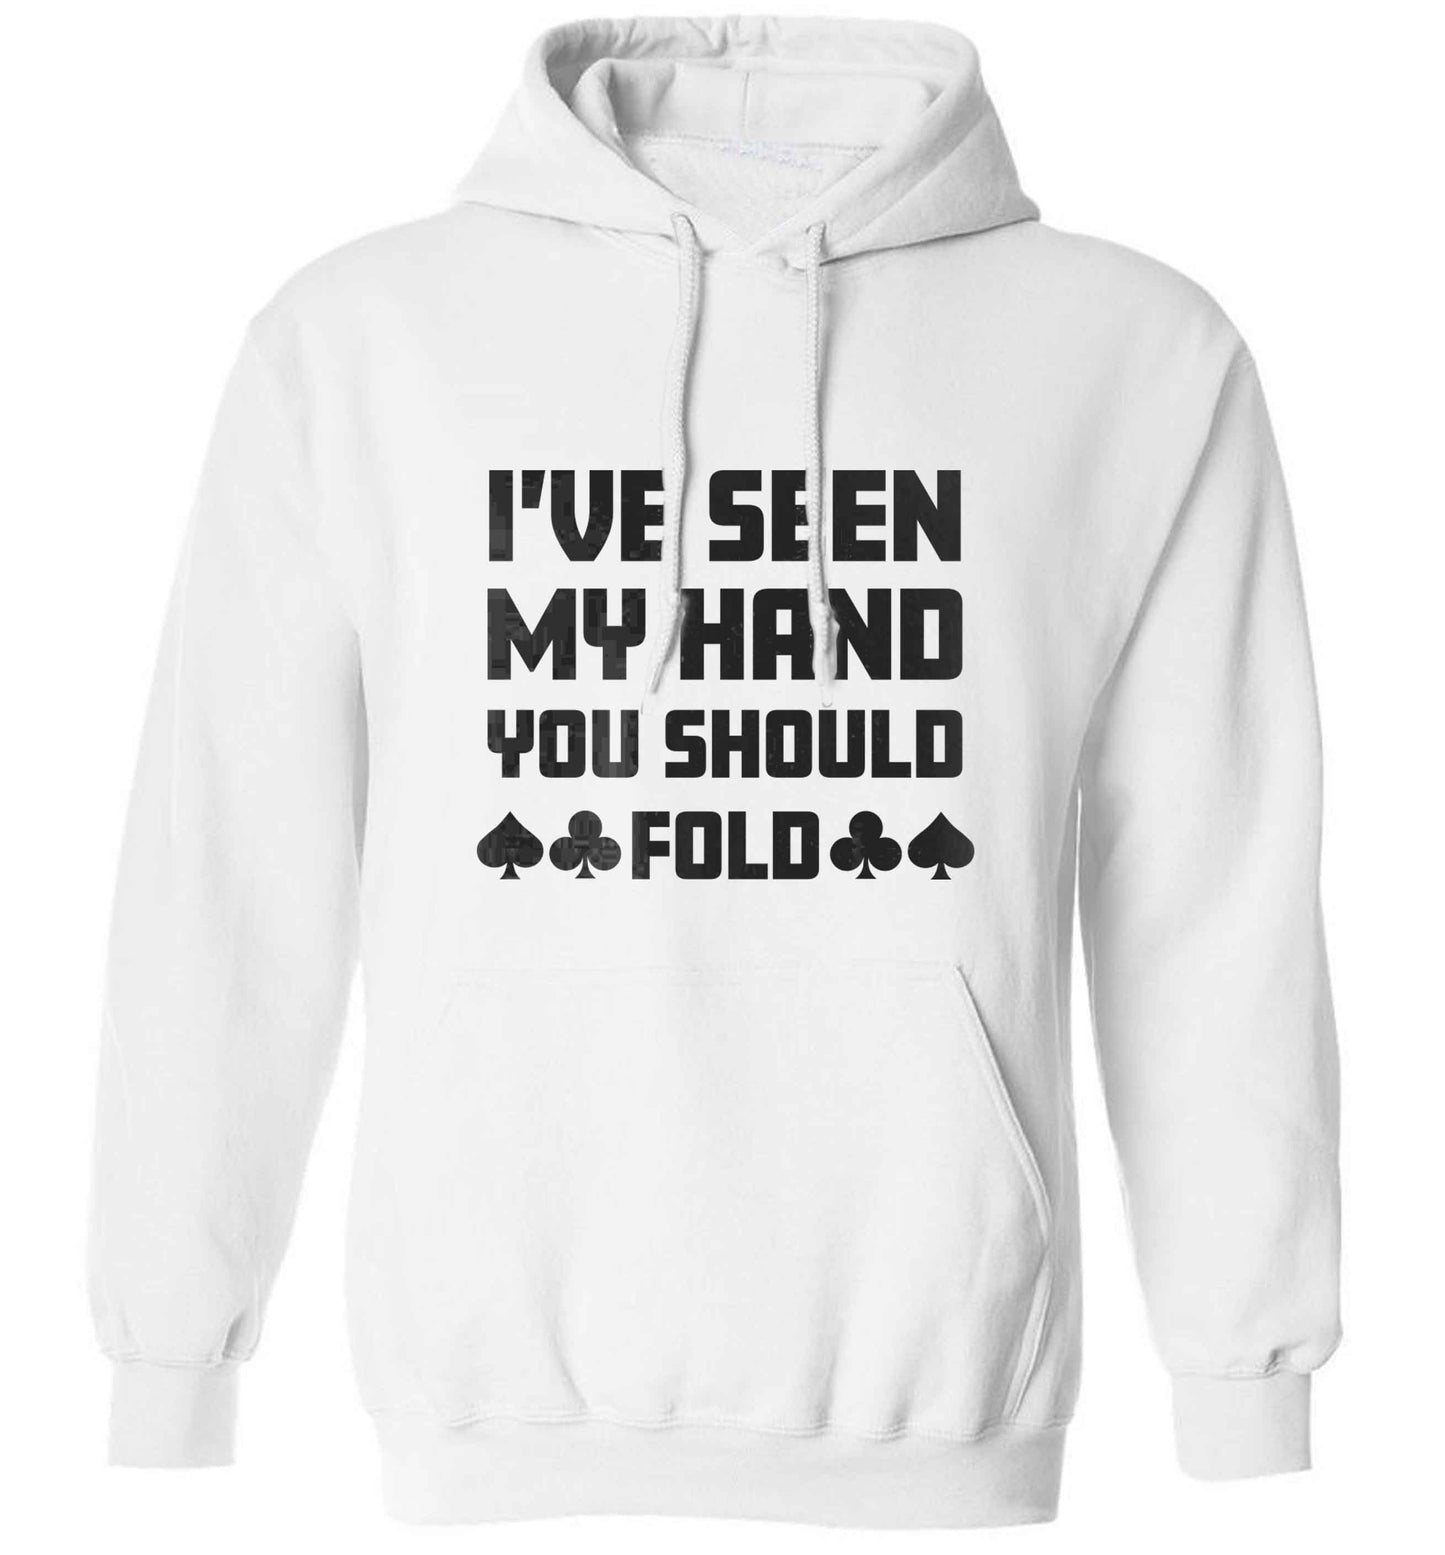 I've seen my hand you should fold adults unisex white hoodie 2XL